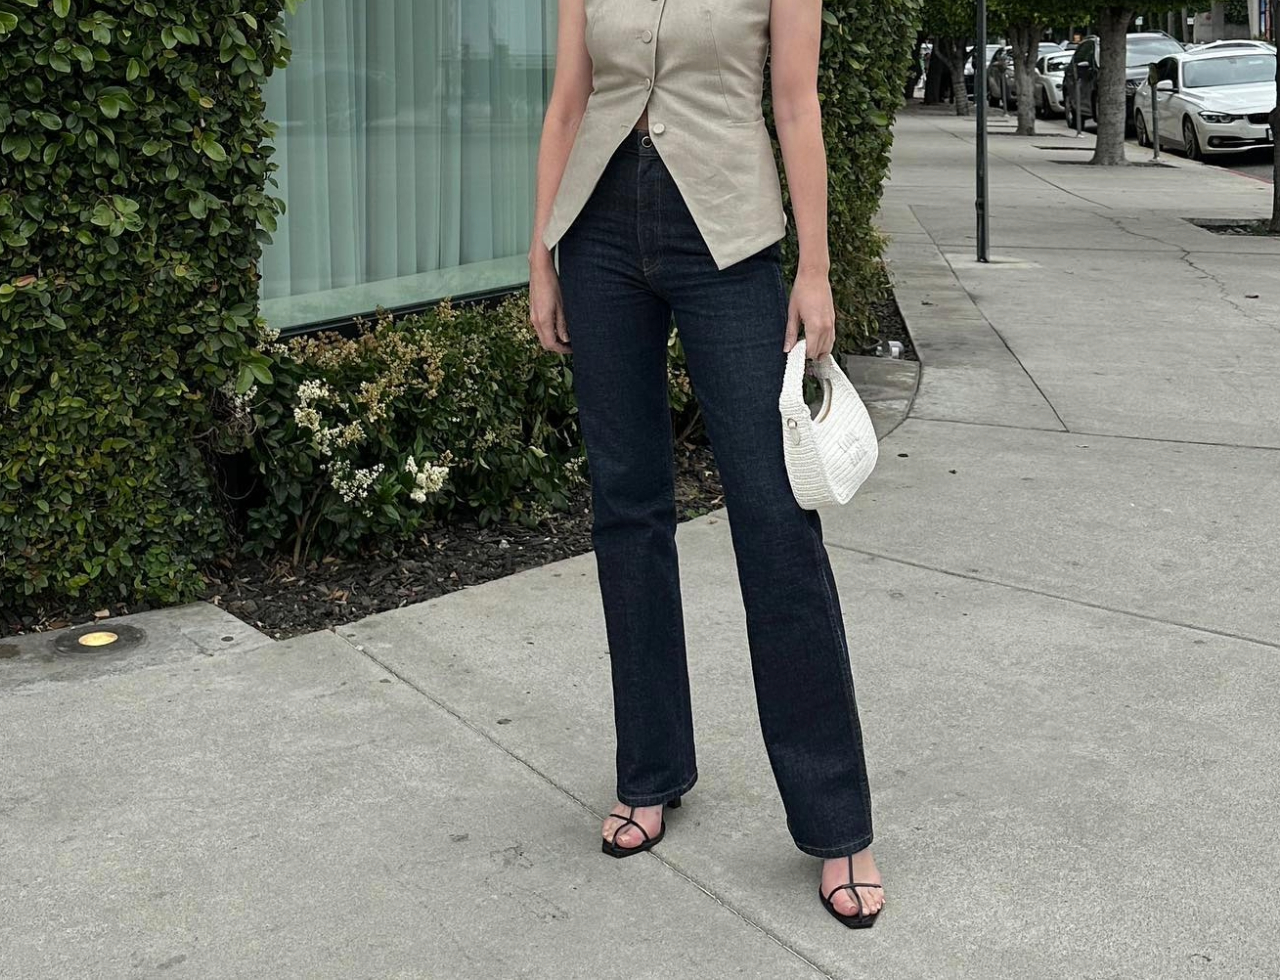 @kristenmarienichols wearing Madewell jeans with a vest and sandals.